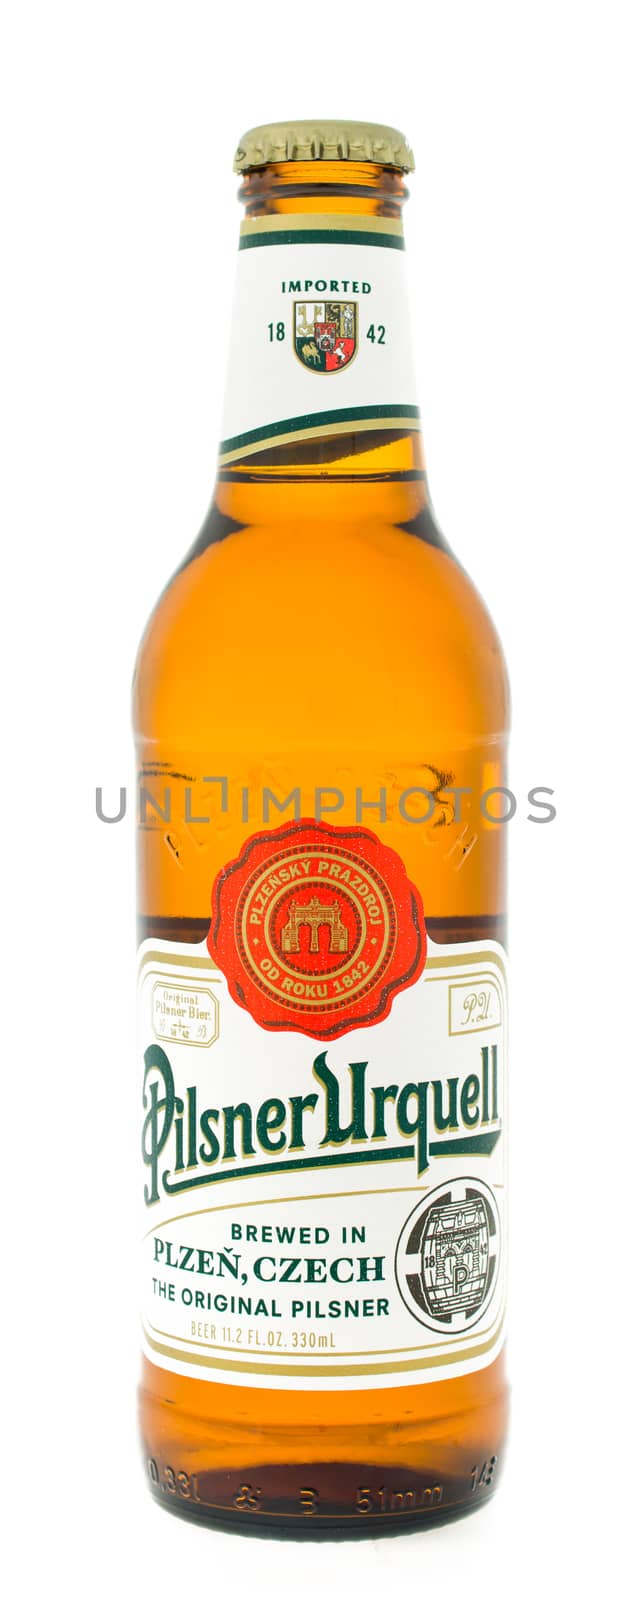 Winneconne, WI - 3 February 2015:  Pilsner Urquell beer was first brewed in 1842 and located in Plzen, Czech Republic.